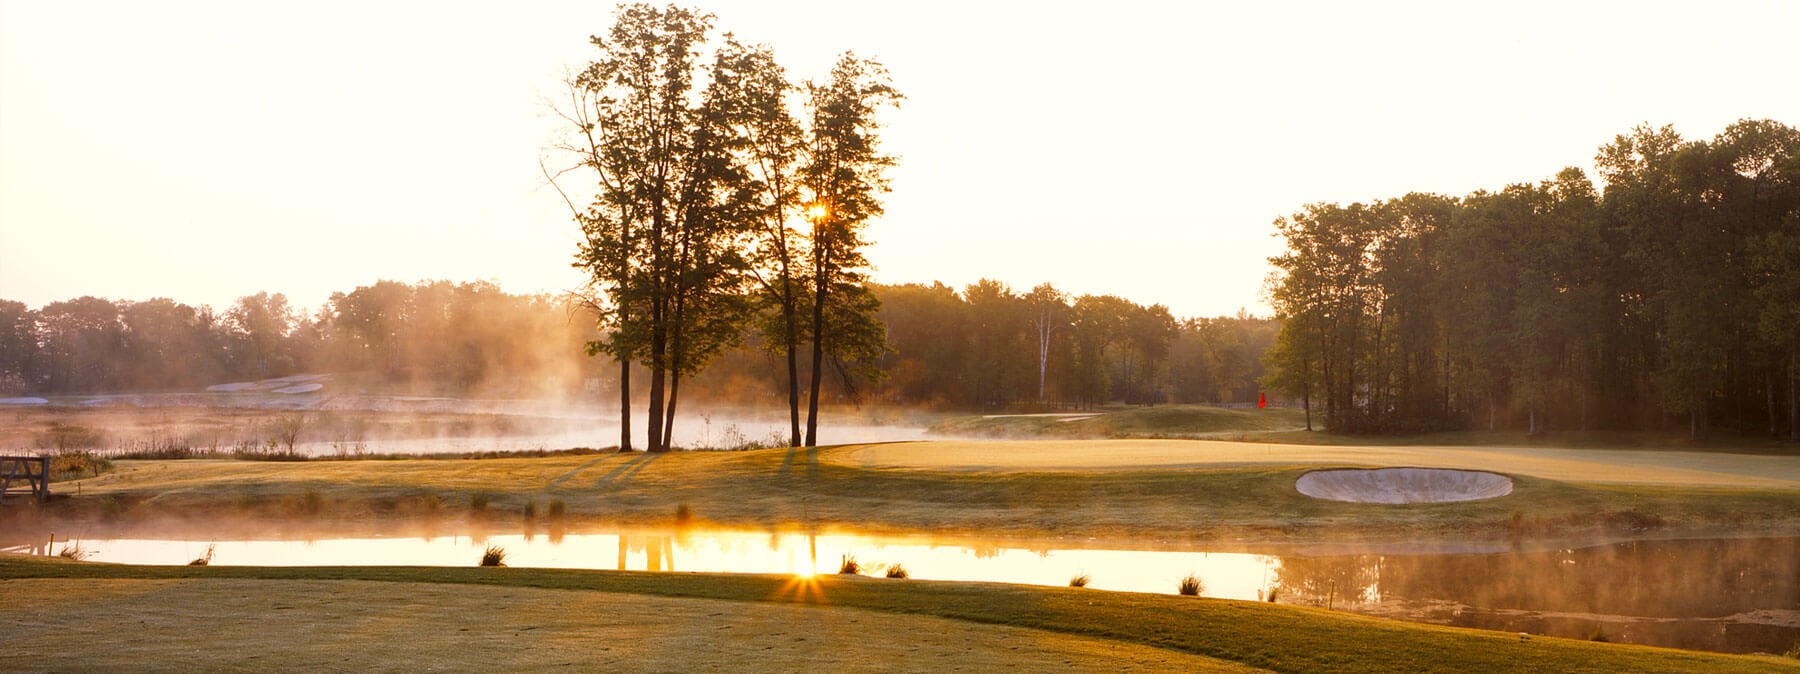 Picturesque golf course by lake stages Winter Classic